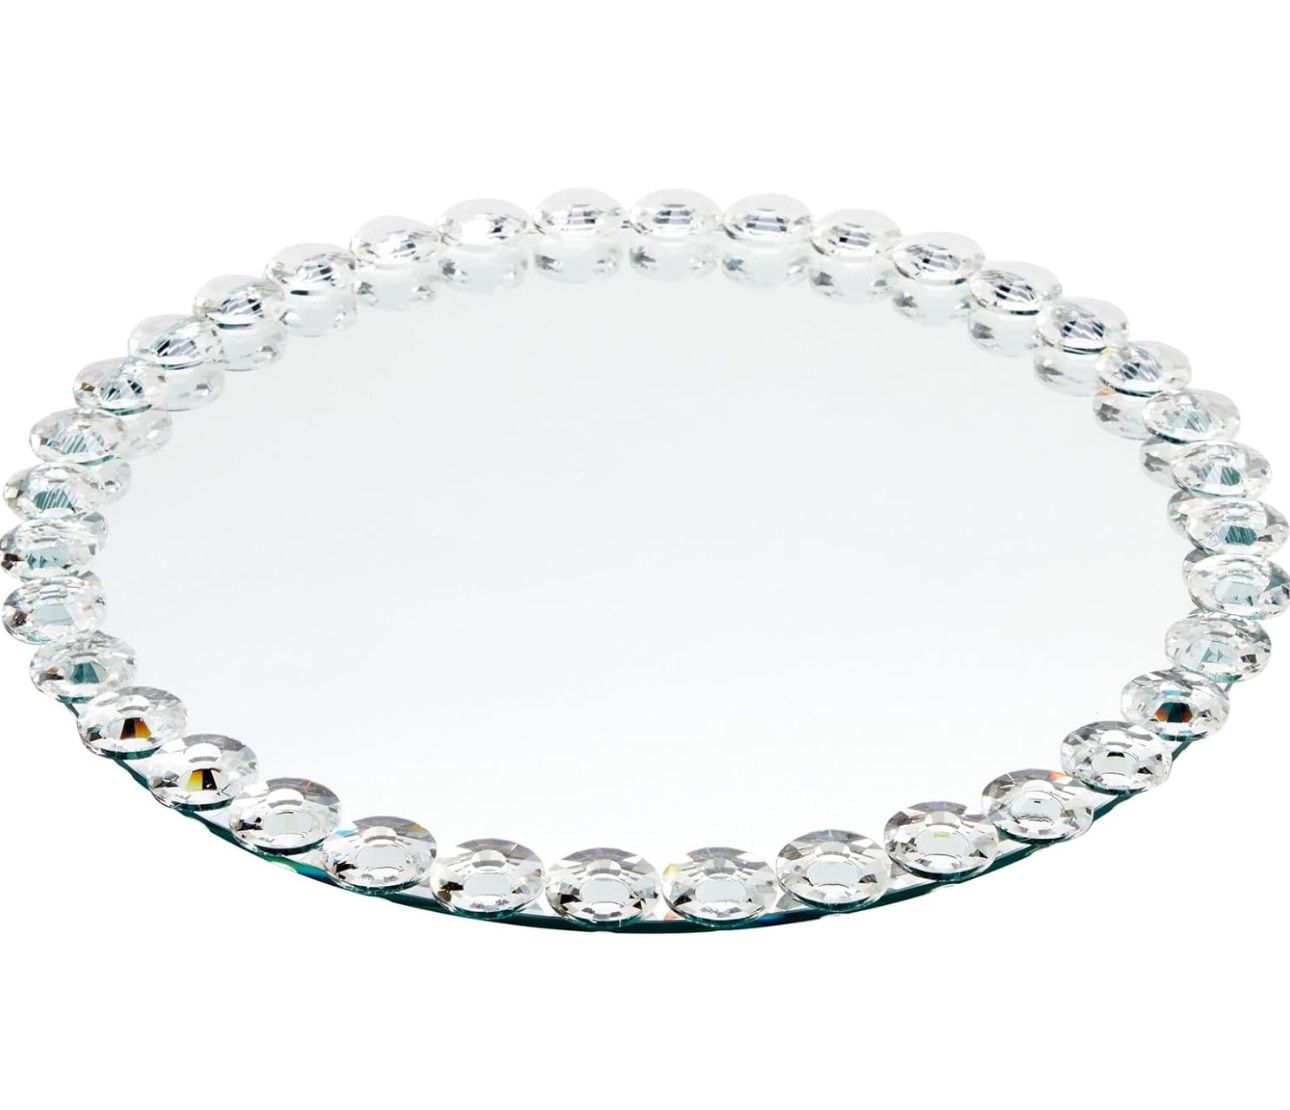 Okuna Outpost 12 in Crystal Bead Round Mirror Tray to Display Perfume, Jewelry, Candles, Bling Serving Tray for Bathroom, Living Room, Office, Vanity,